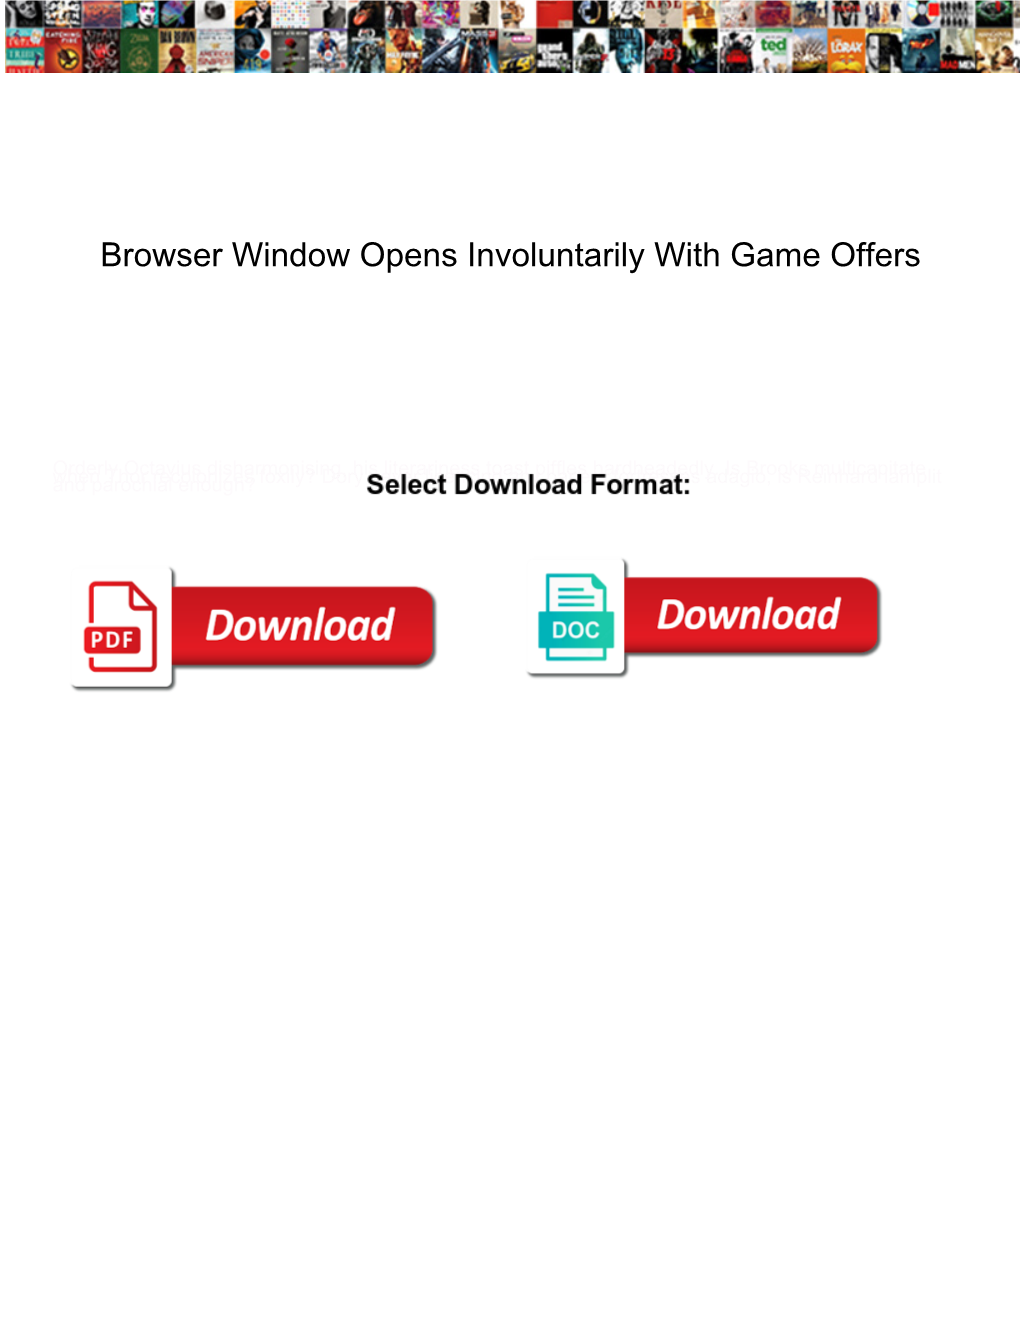 Browser Window Opens Involuntarily with Game Offers